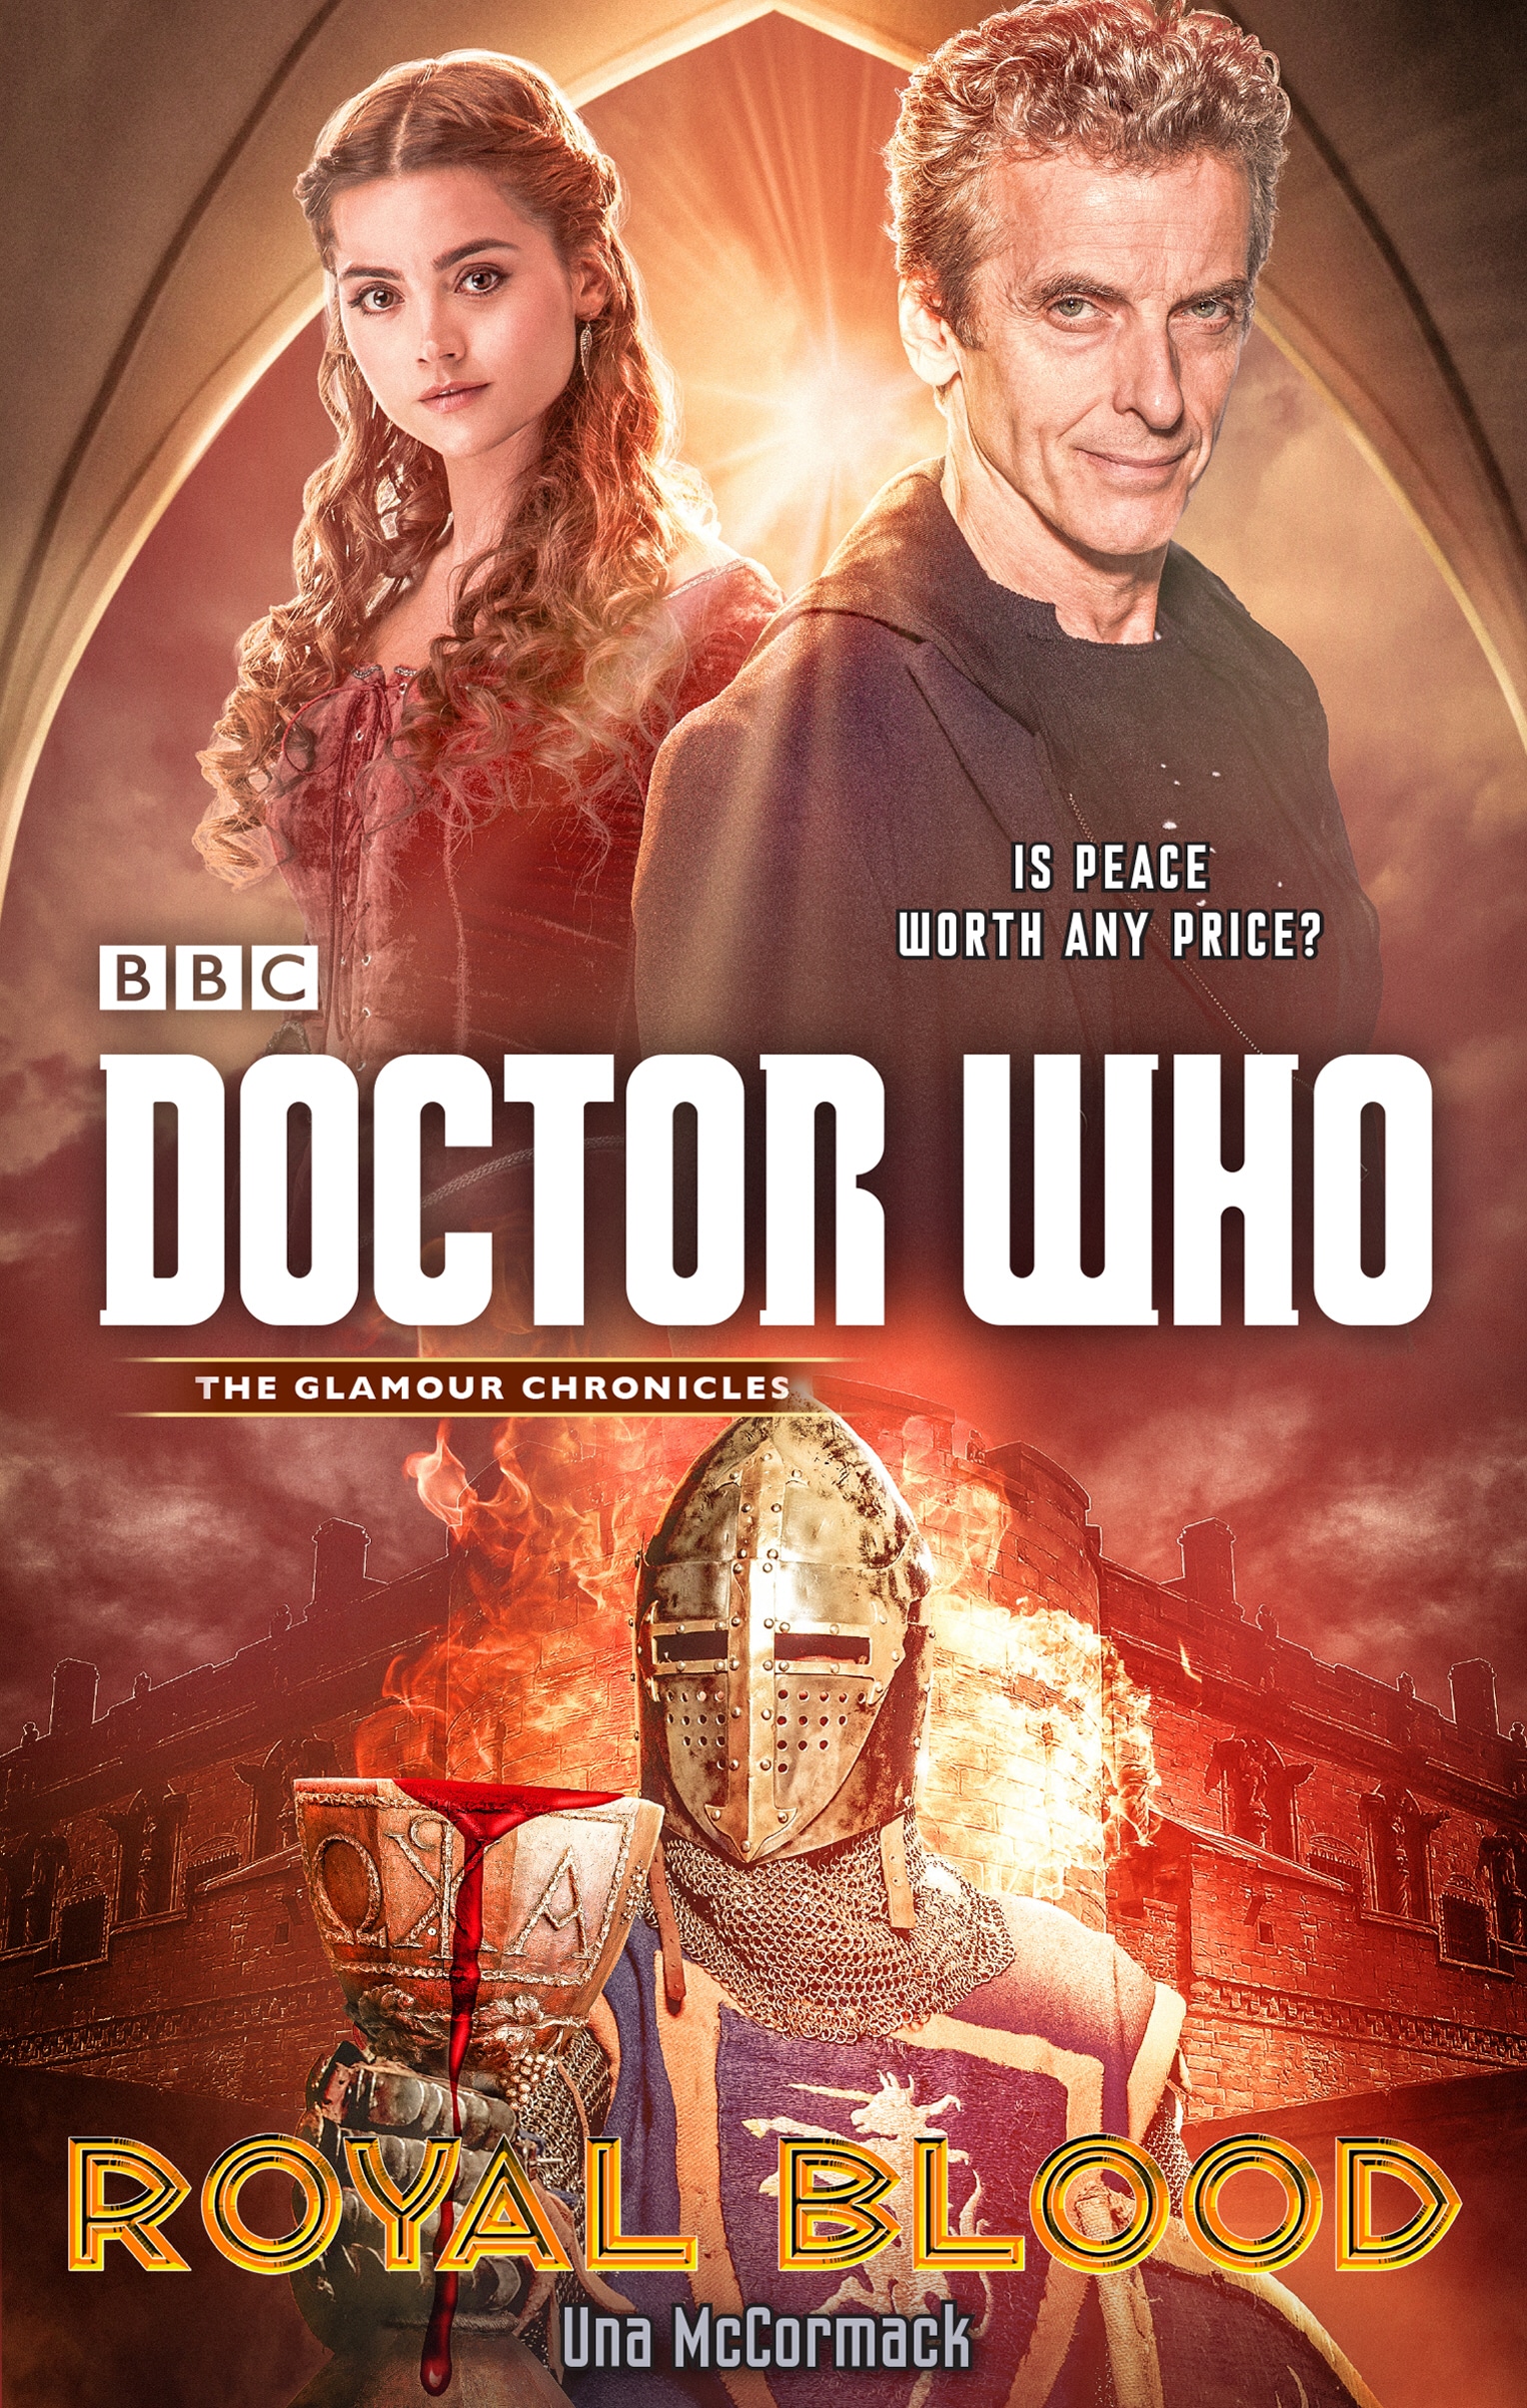 Book “Doctor Who: Royal Blood” by Una McCormack — February 28, 2019